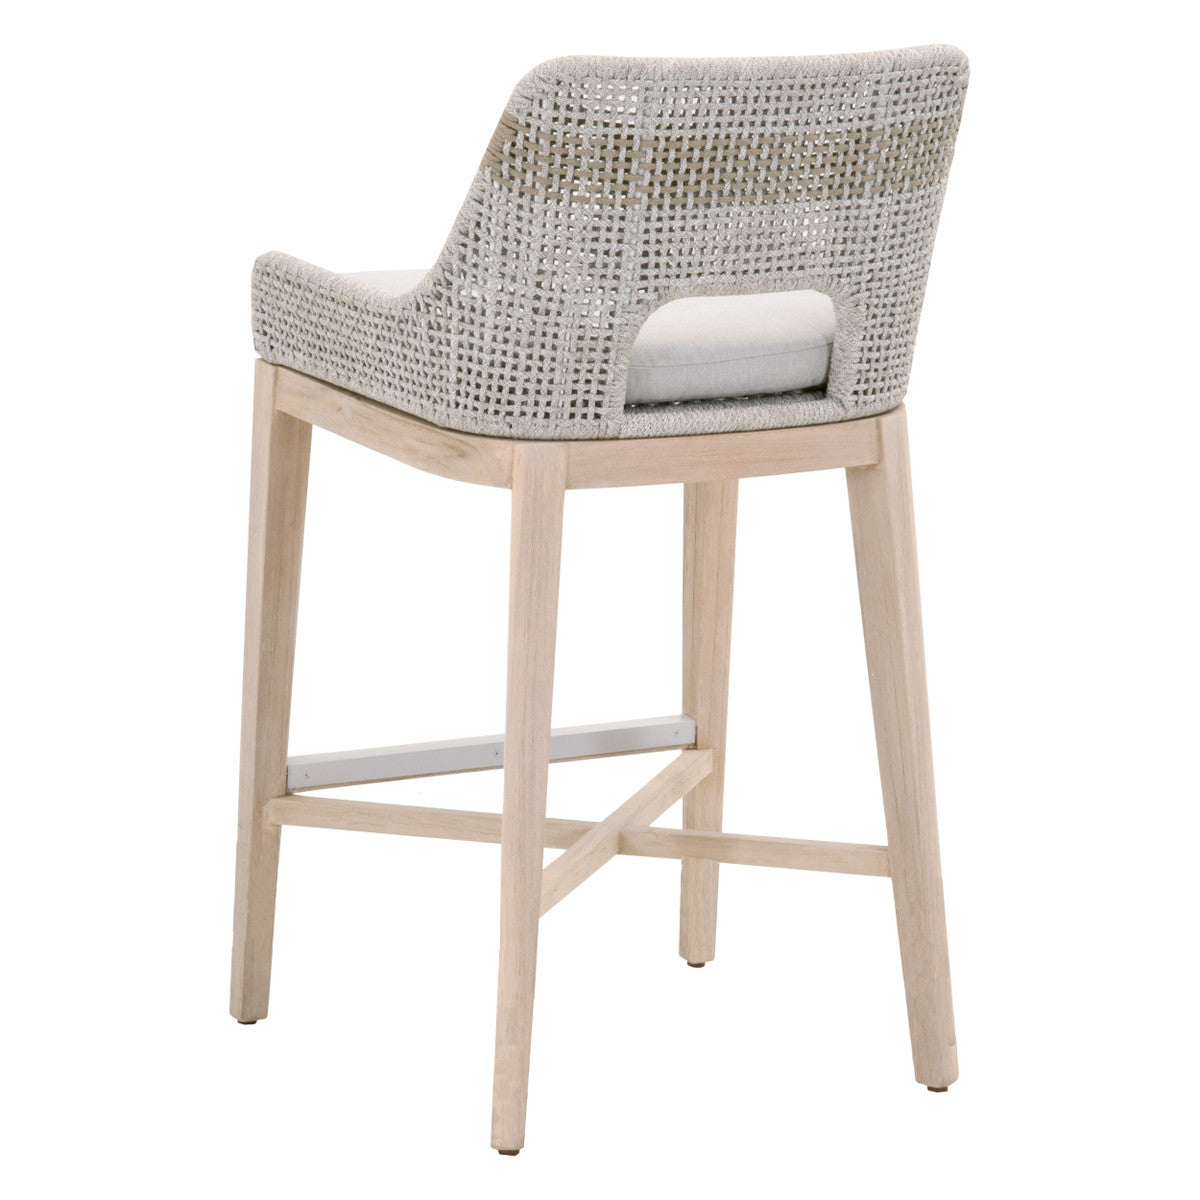 Tapestry Outdoor Barstool in Taupe & White Flat Rope, Taupe Stripe, Performance Pumice, Gray Teak - 6850BS.WTA/PUM/GT